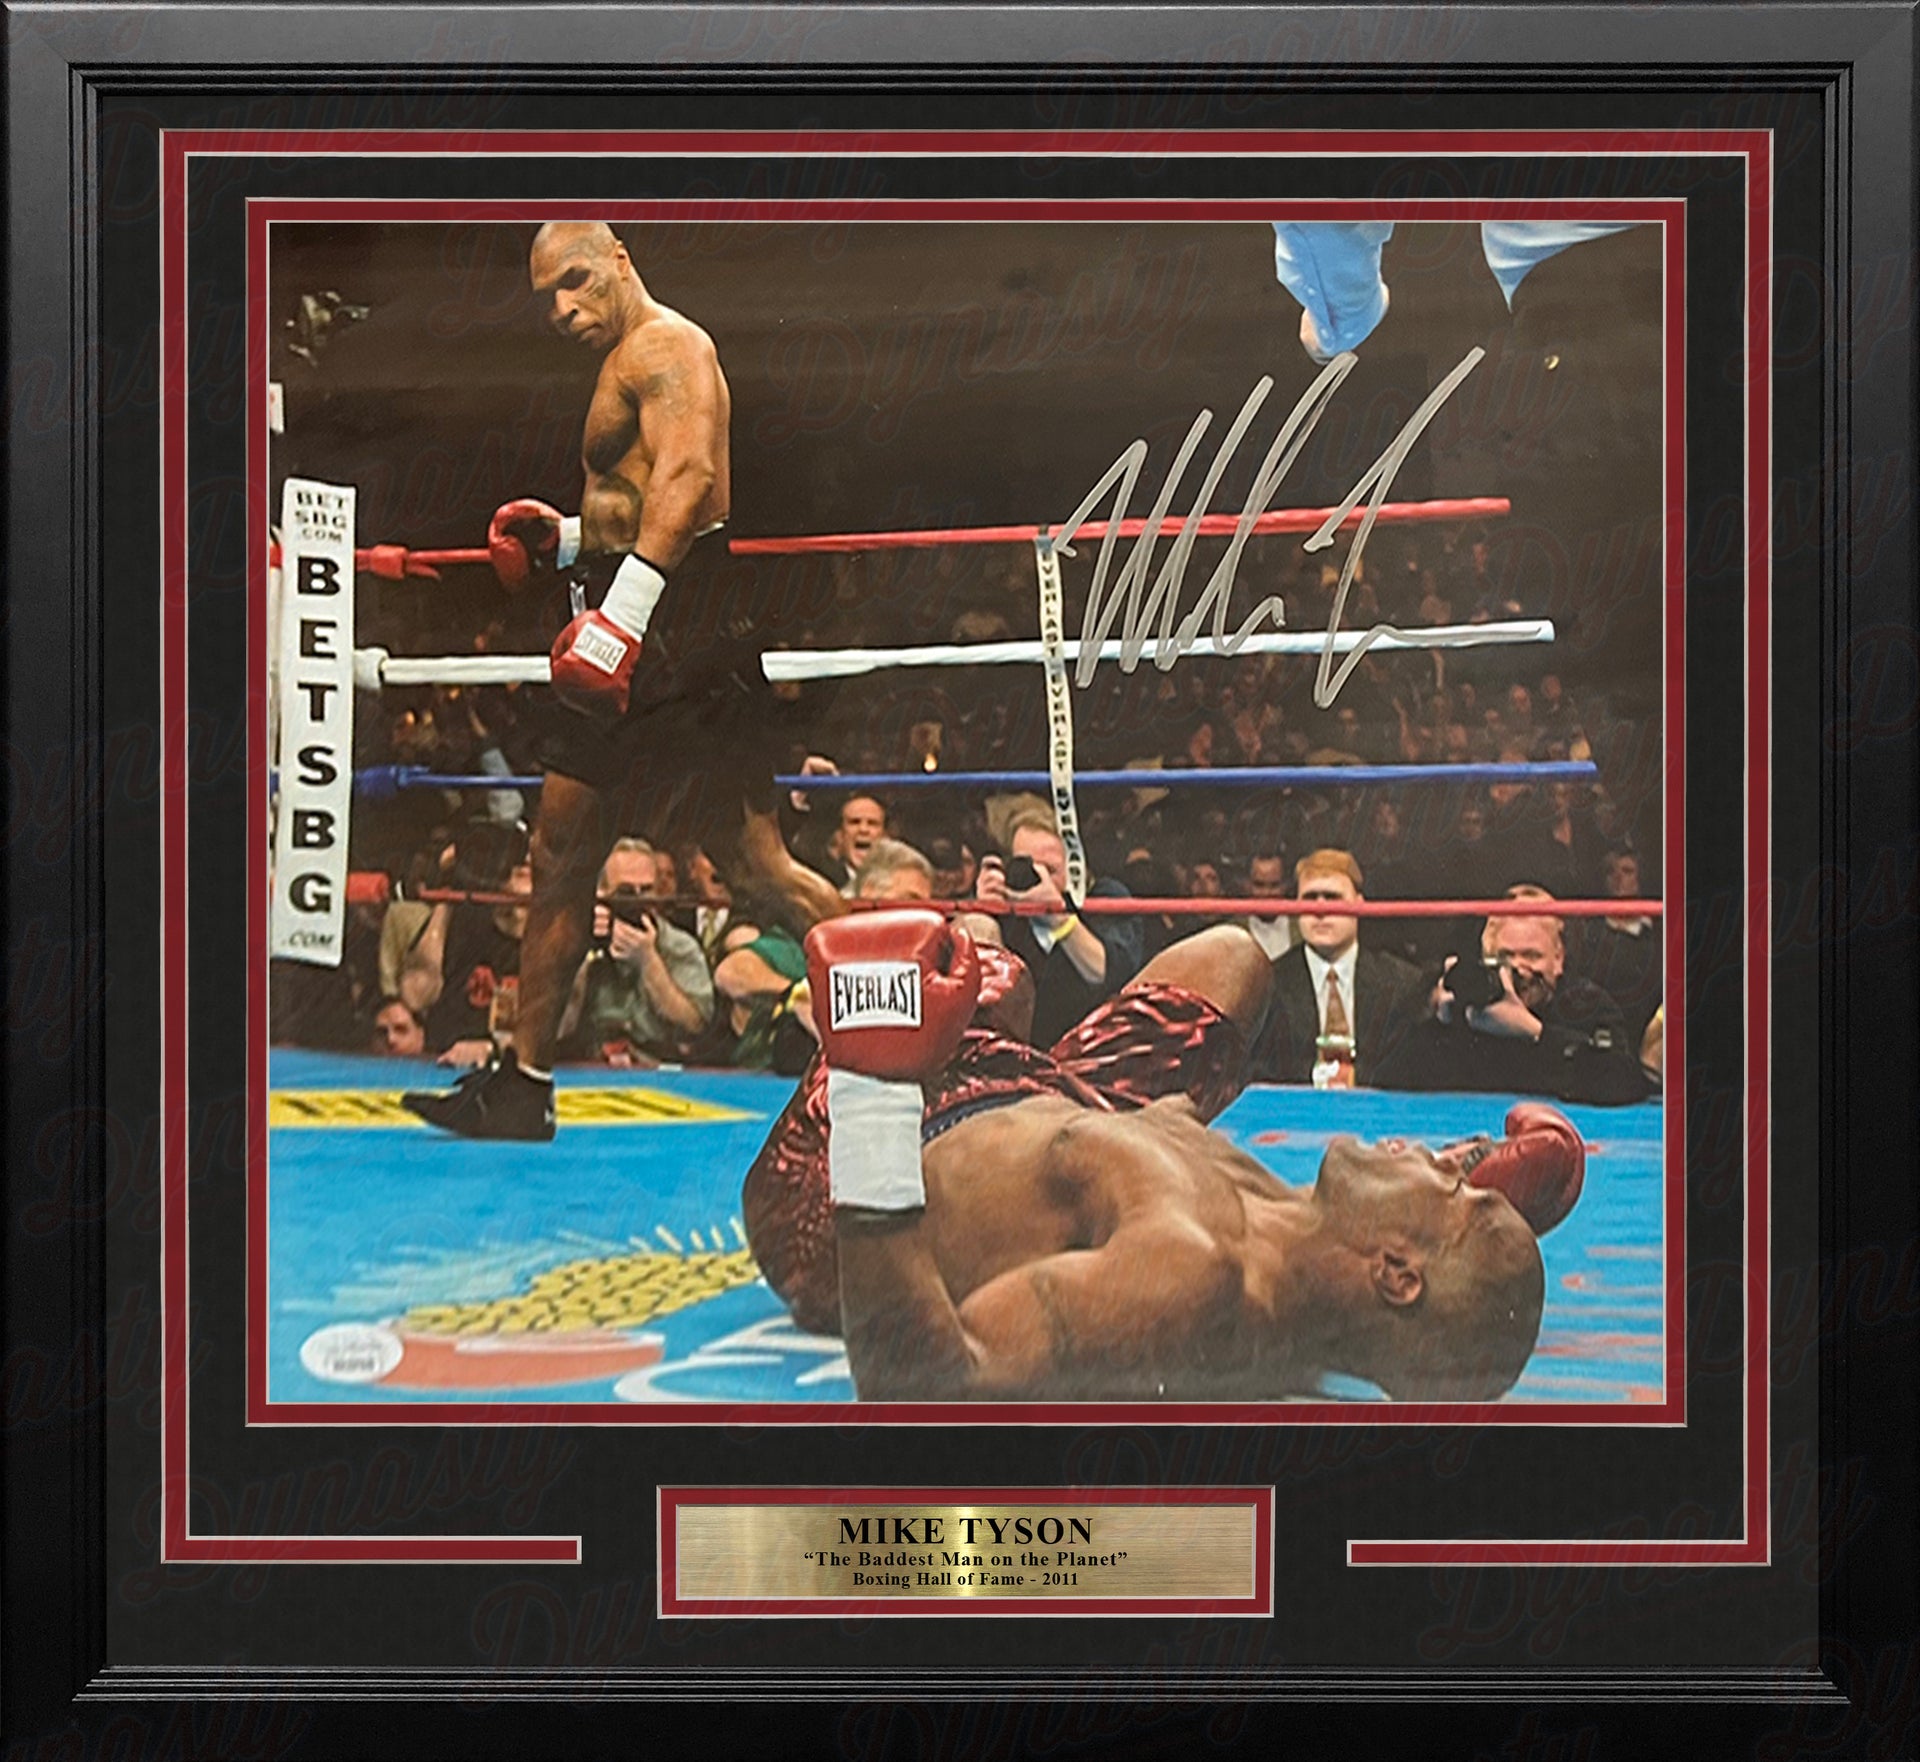 Mike Tyson in Action Autographed Framed Boxing Photo - Dynasty Sports & Framing 